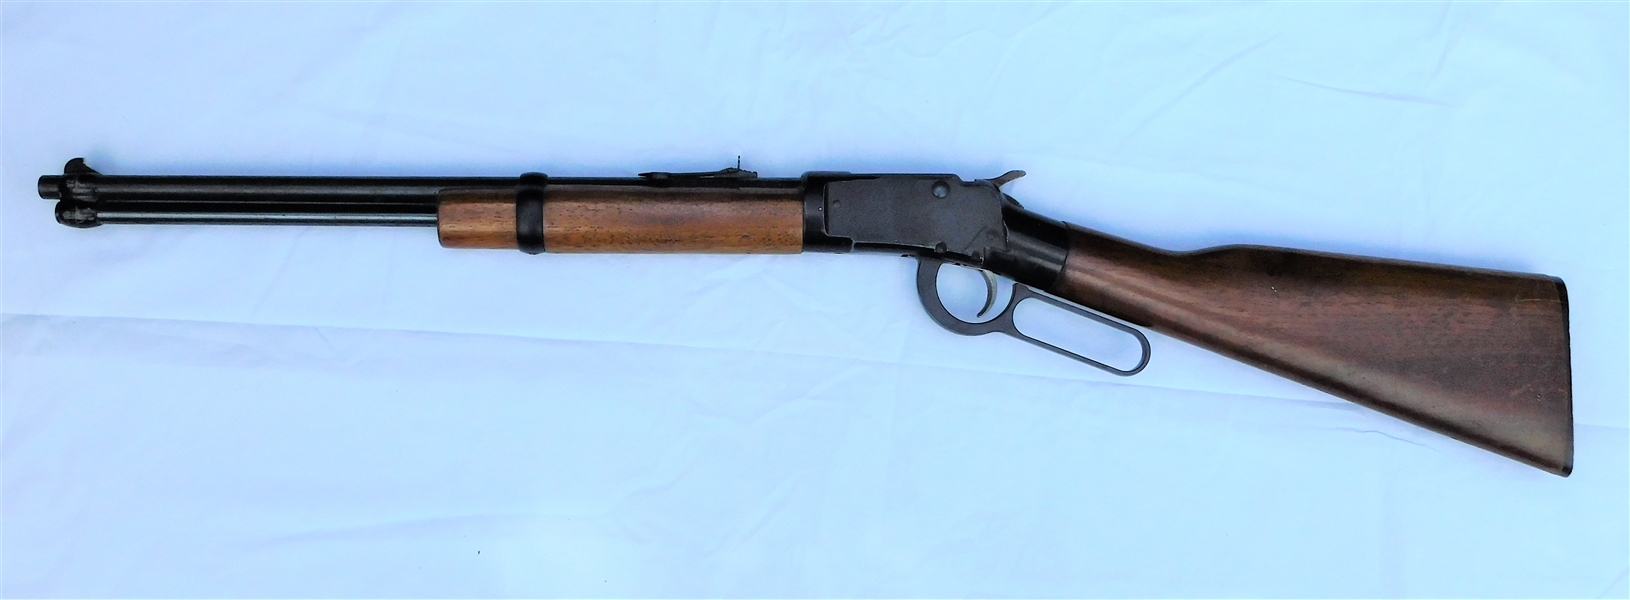 Ithaca Gun Company M-49 .22 Caliber Short, Long, or LR Lever Action Rifle - Made in USA